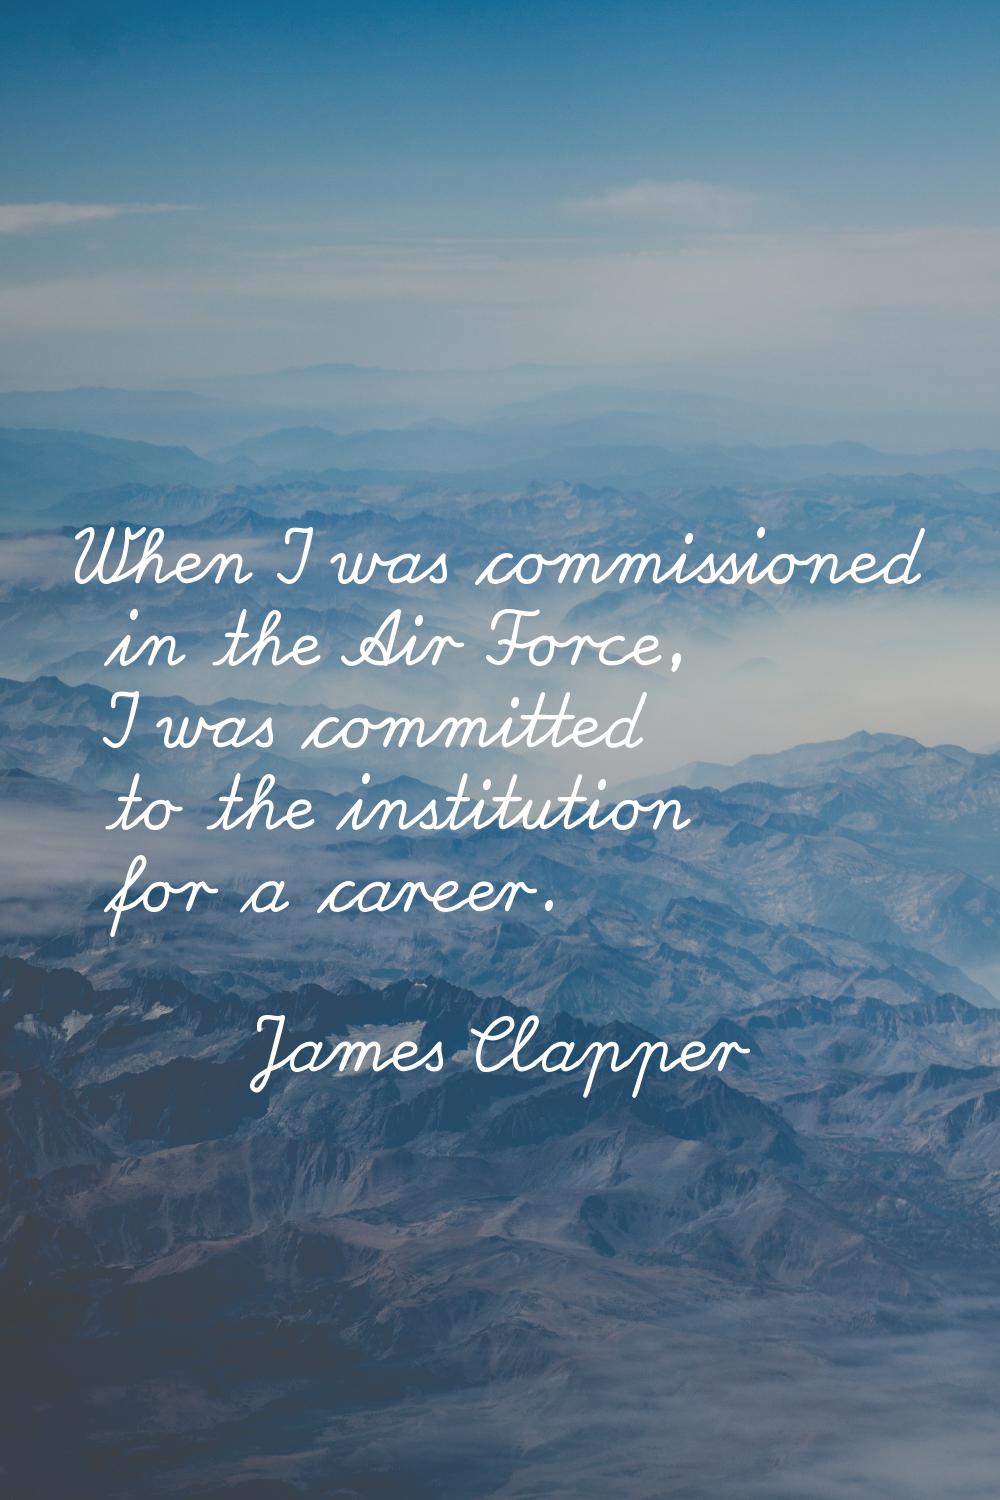 When I was commissioned in the Air Force, I was committed to the institution for a career.